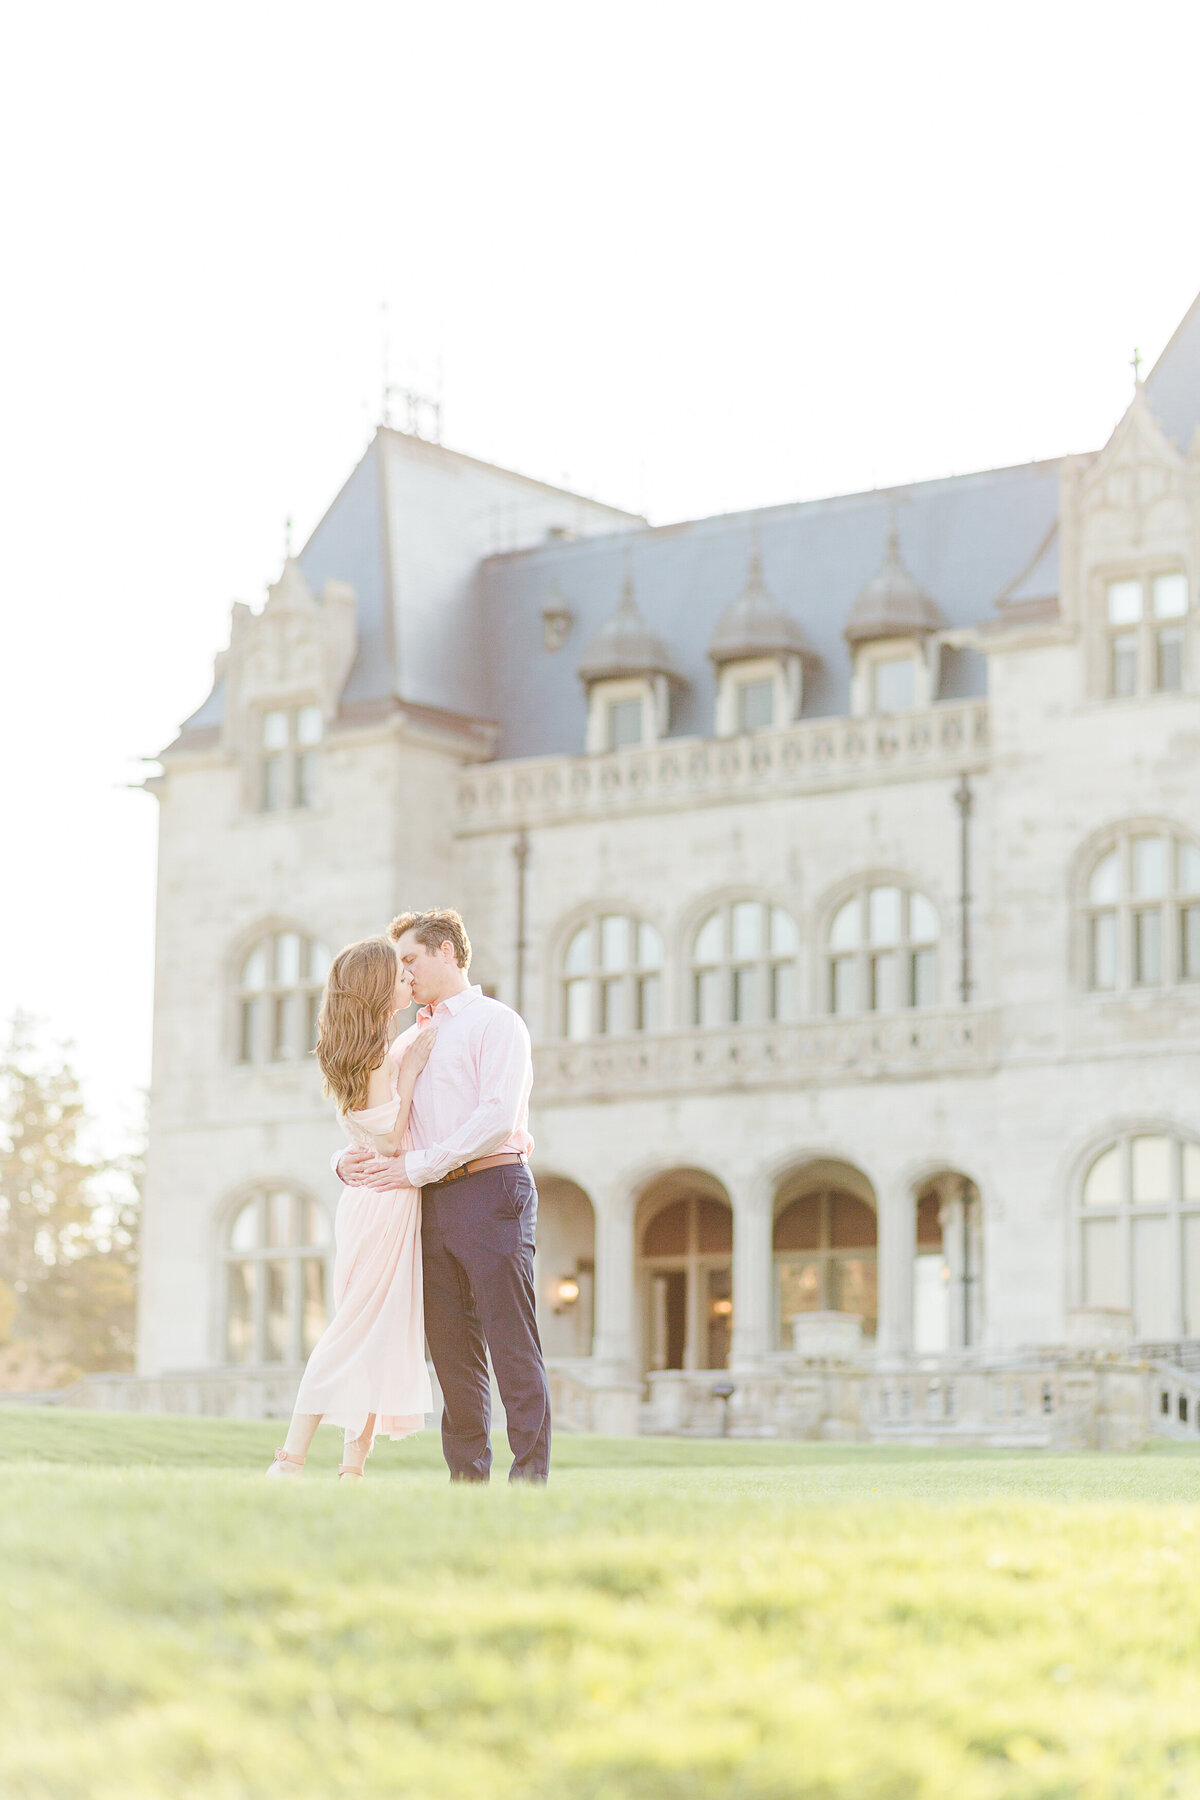 Couple stands in front of Salve Regina stone buildings in a warm embrace for their Newport, RI engagement session. They share a gentle kiss. The buildings are featured prominently in the background. Captured by best RI wedding photographer Lia Rose Weddings